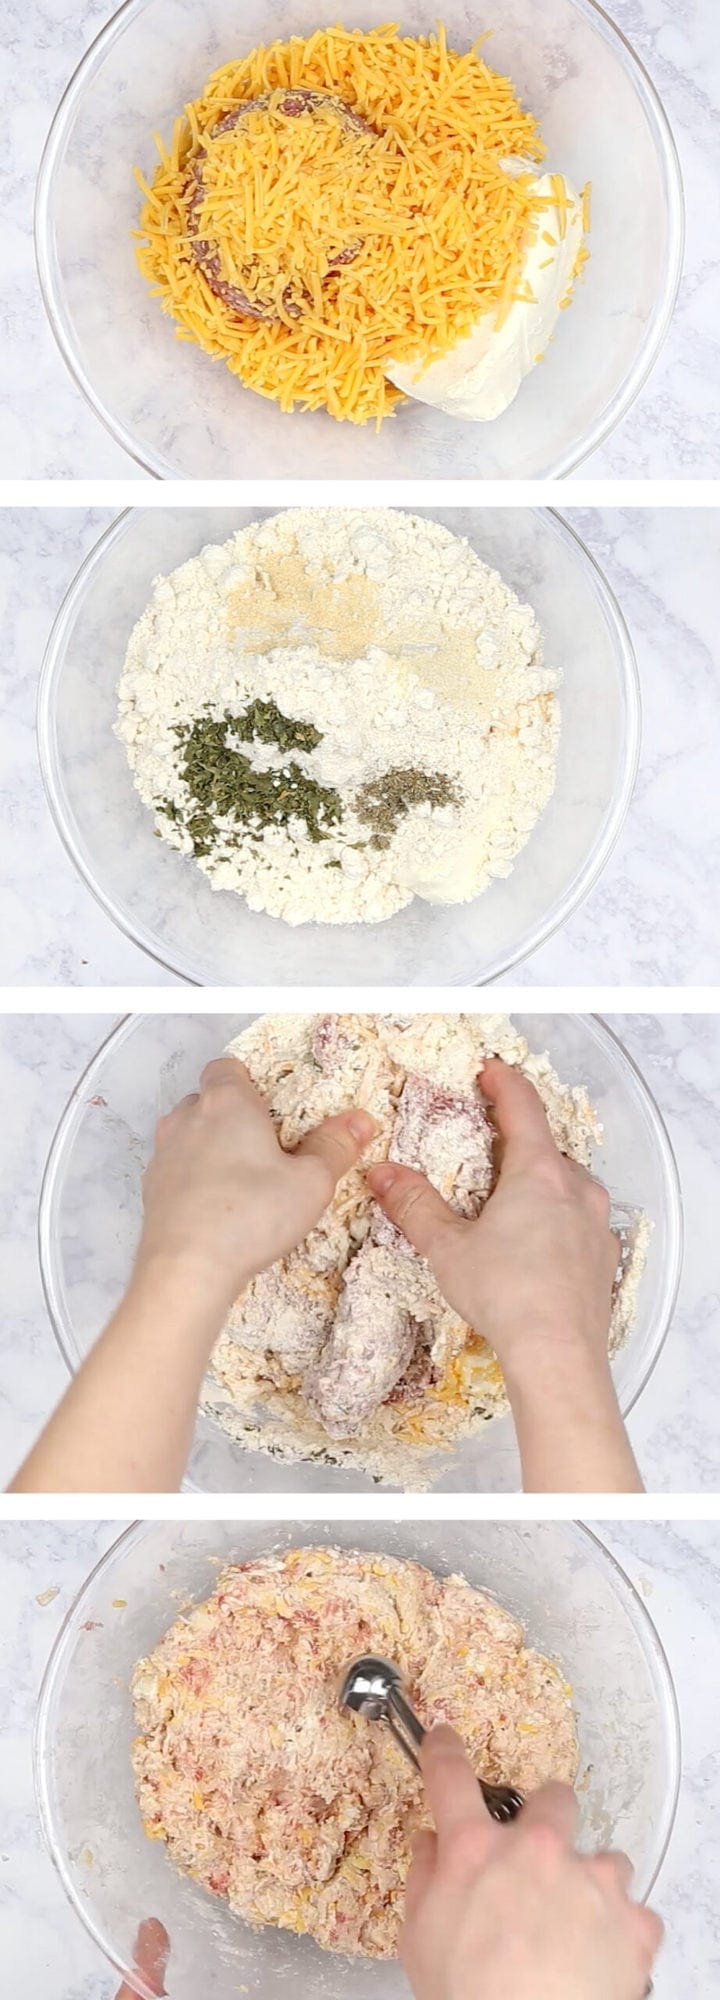 collage of images showing how to make cream cheese sausage balls